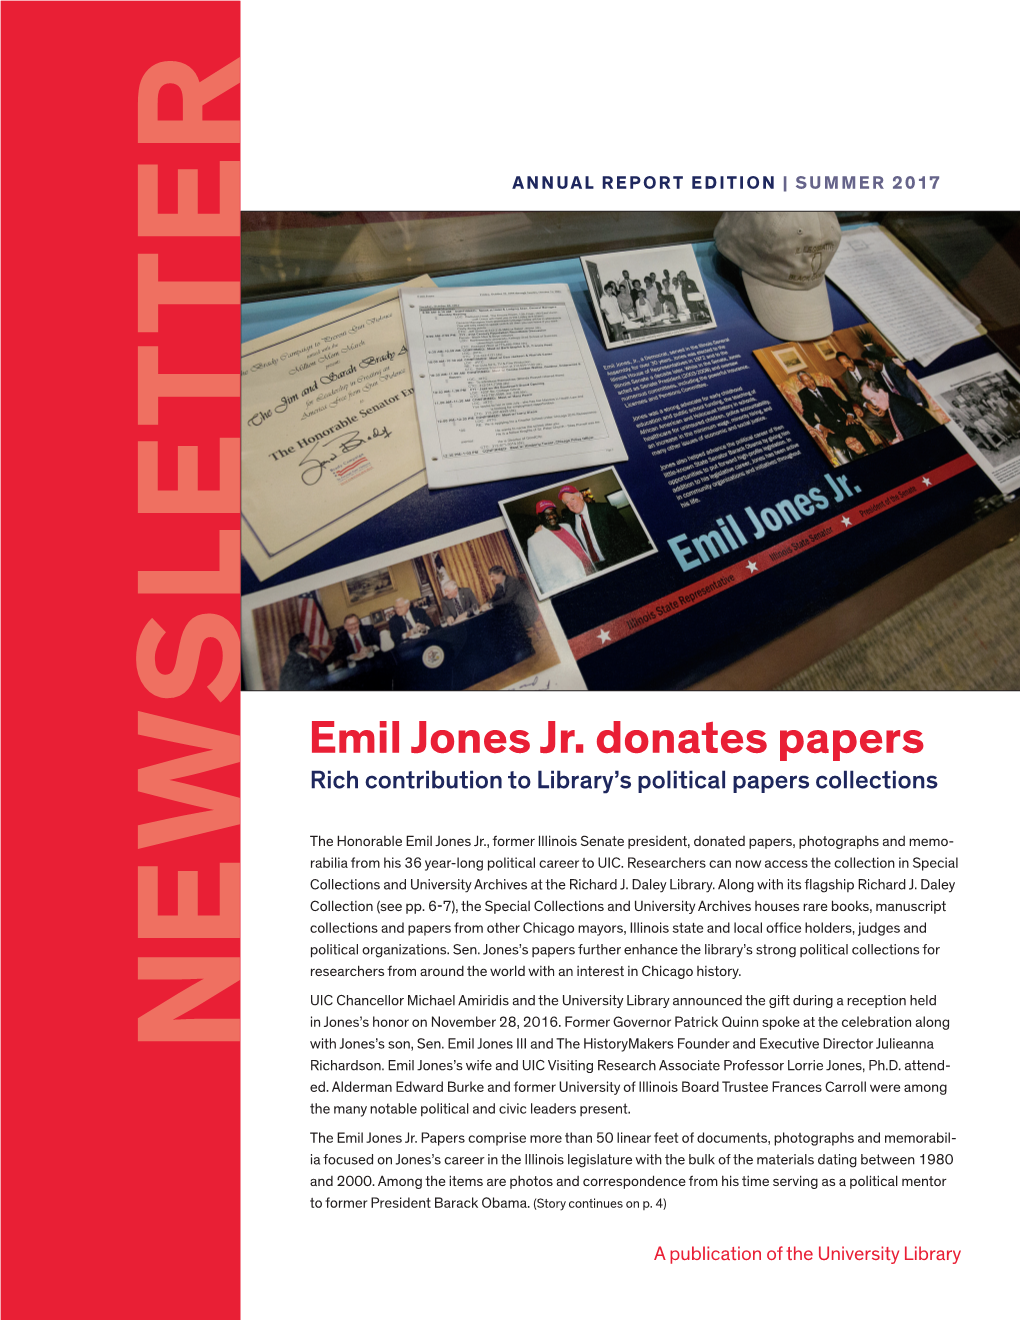 Emil Jones Jr. Donates Papers Rich Contribution to Library’S Political Papers Collections